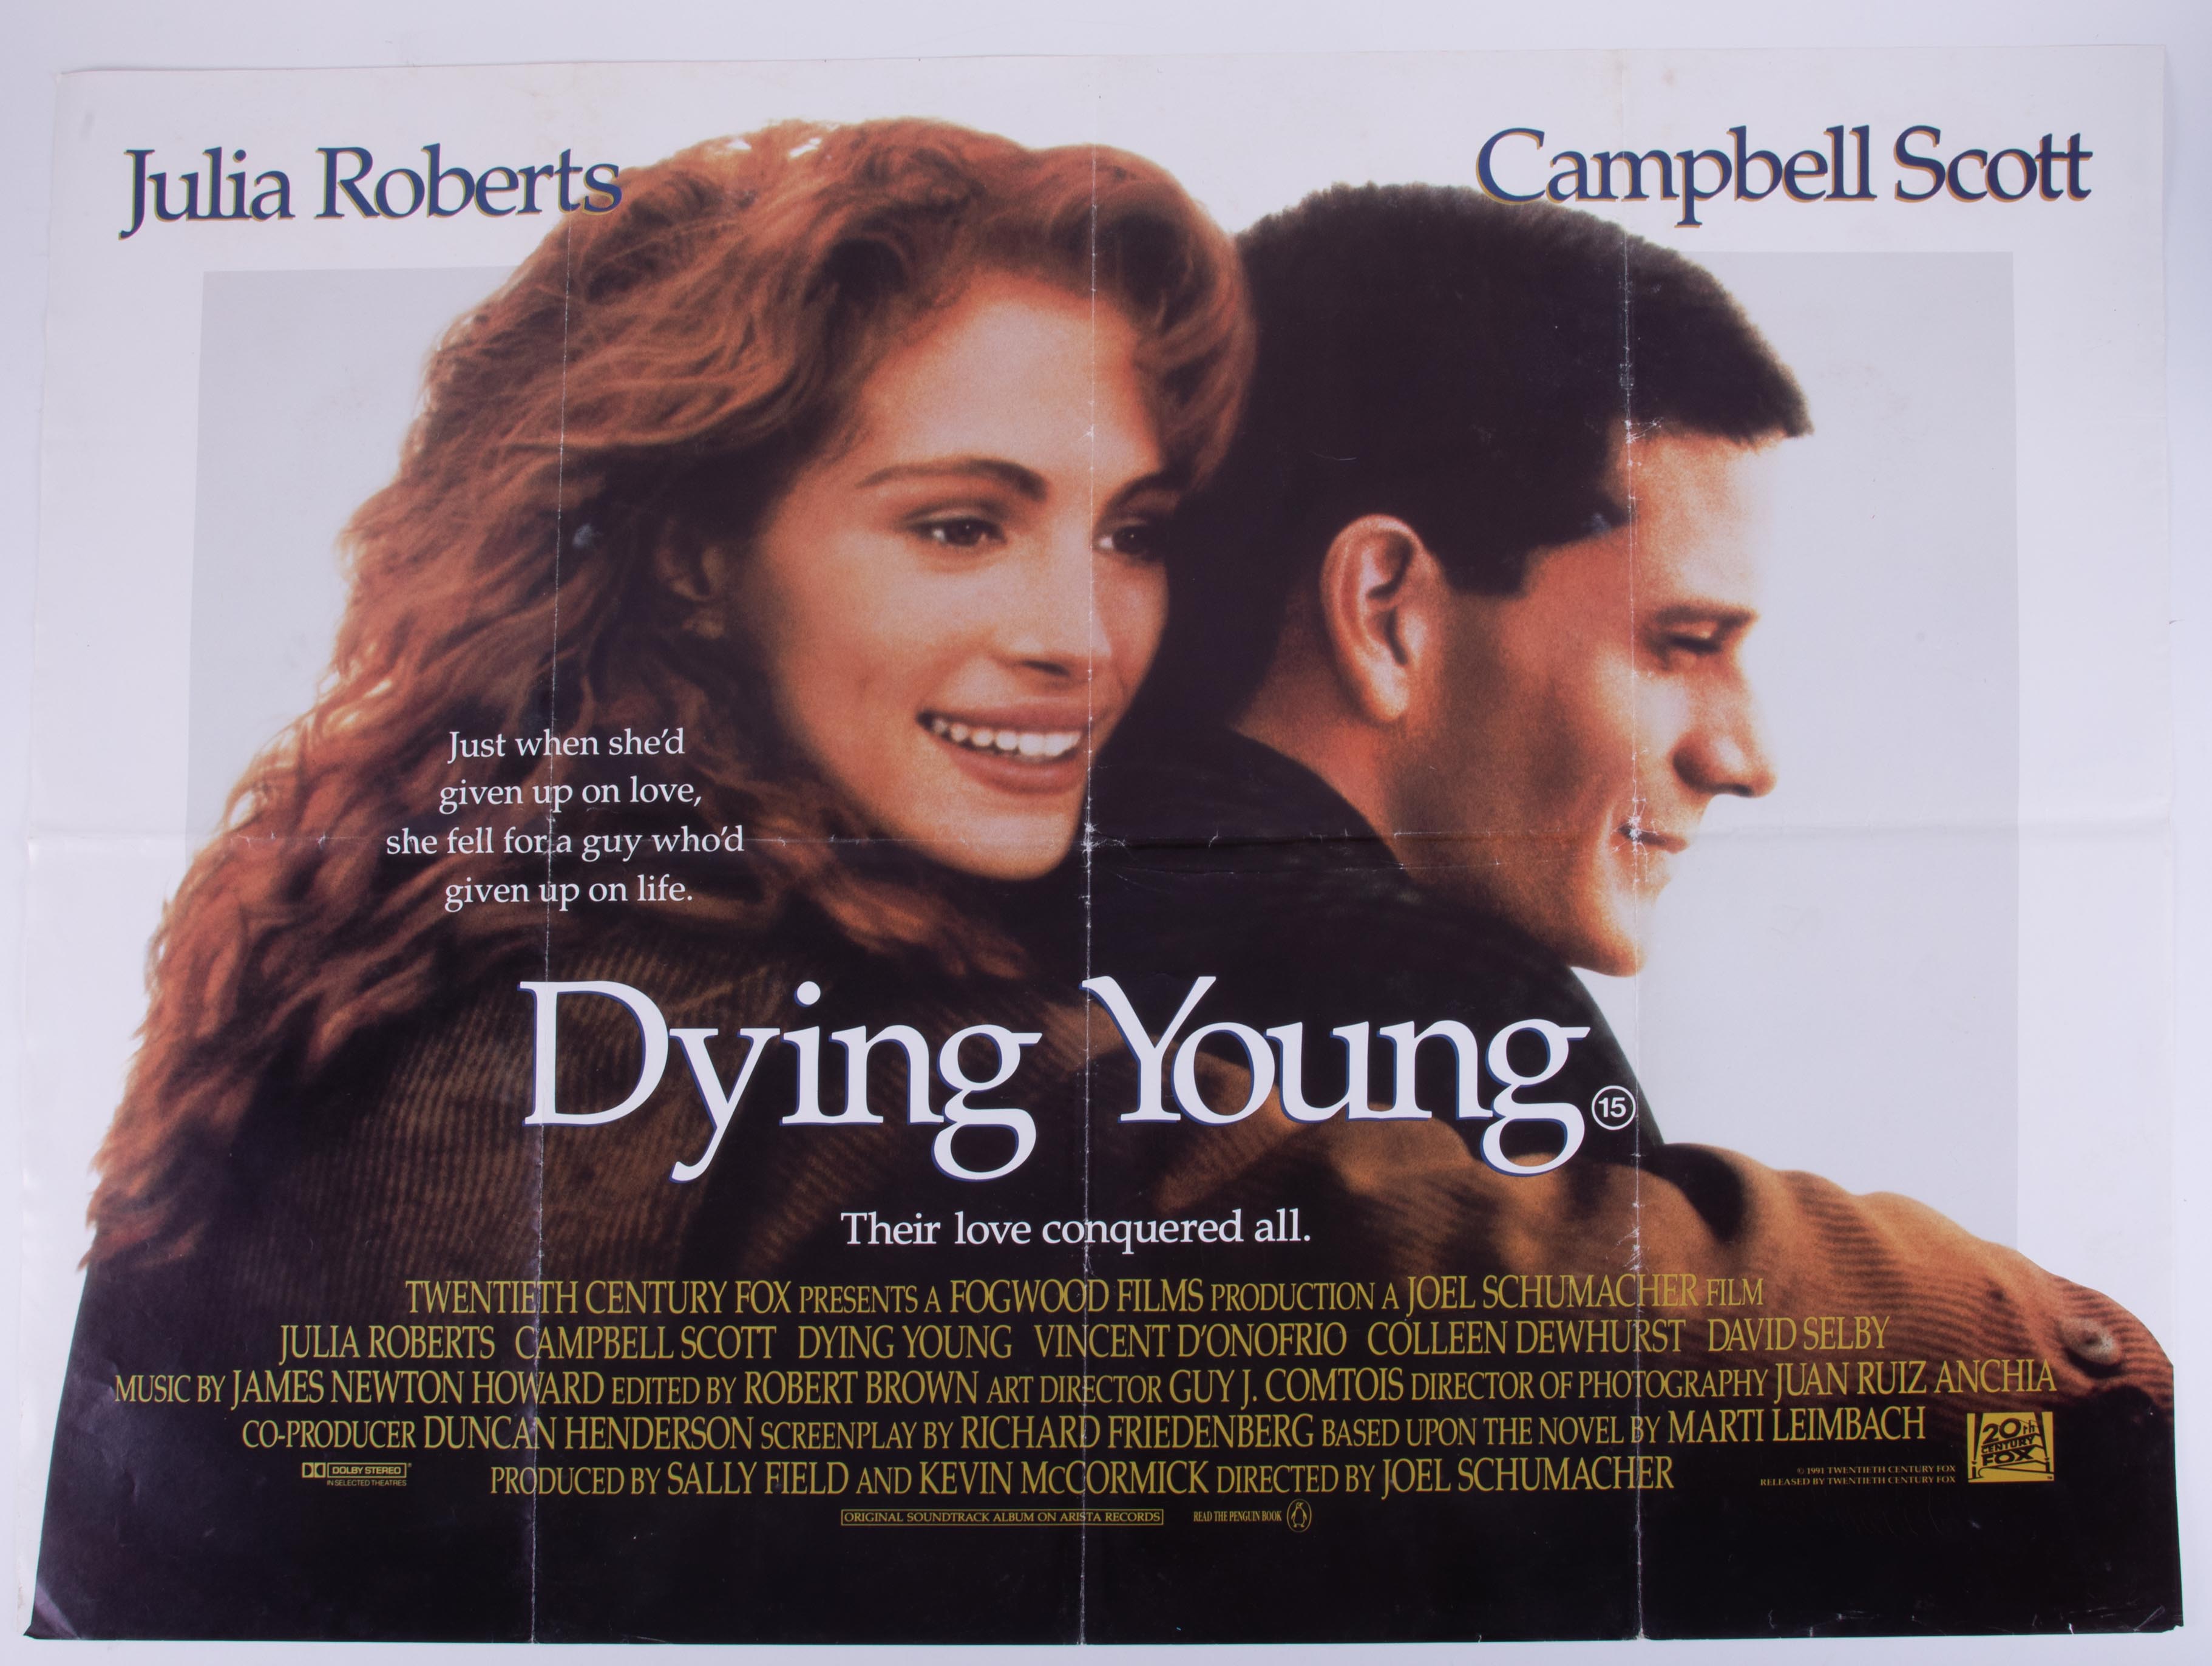 Cinema Poster for the film 'Dying Young' year 1991 featuring Julia Roberts. Provenance: The John